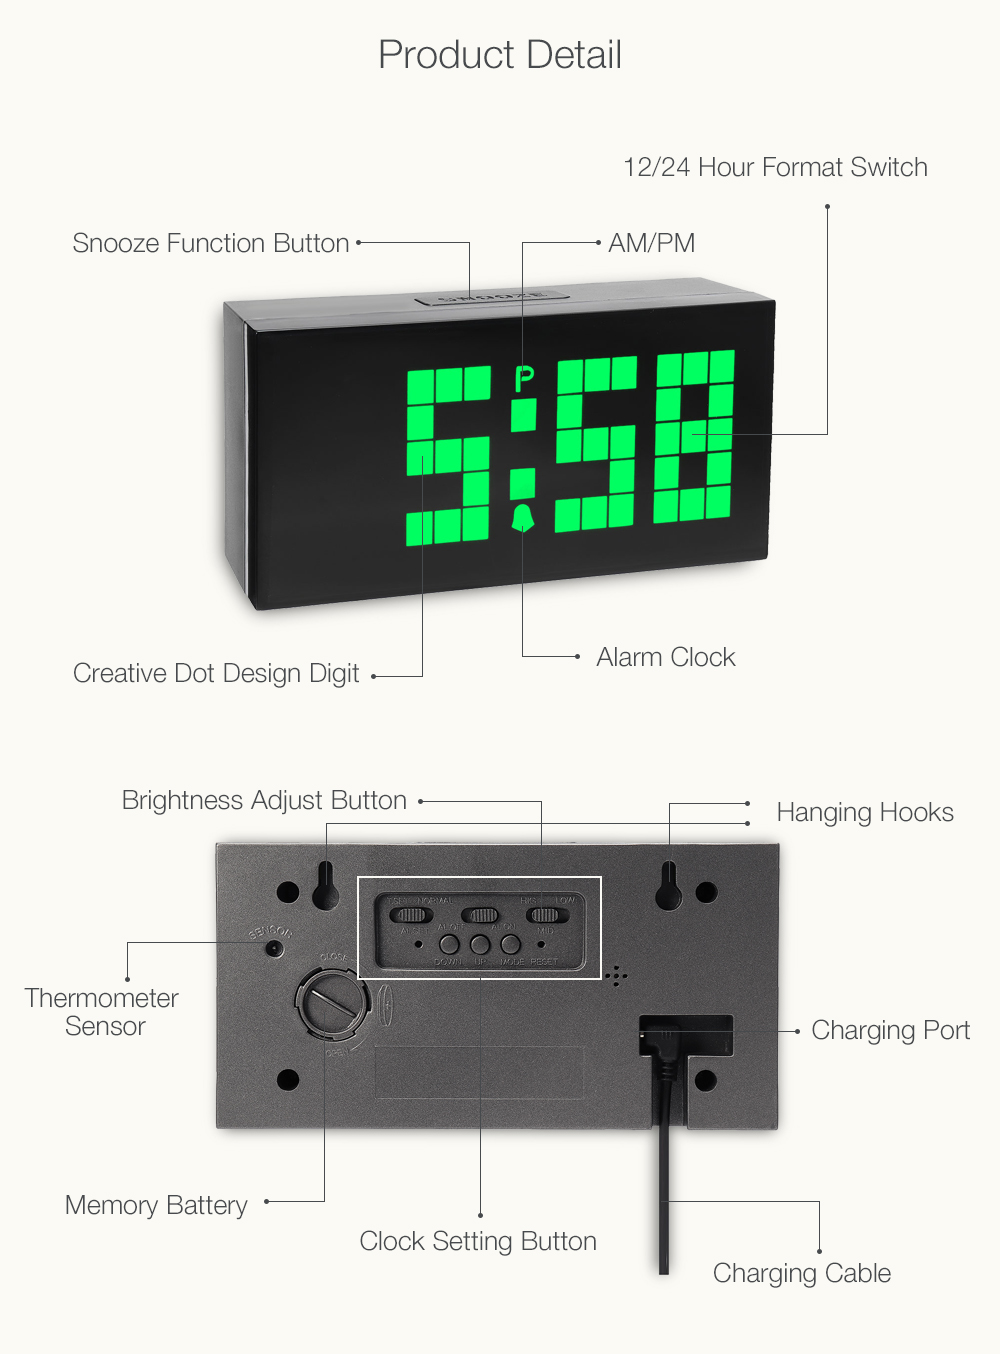 HC-301-Electronic-Creative-LED-Dot-Design-Digit-Cube-Thermometer-Date-Clock-1292400-6